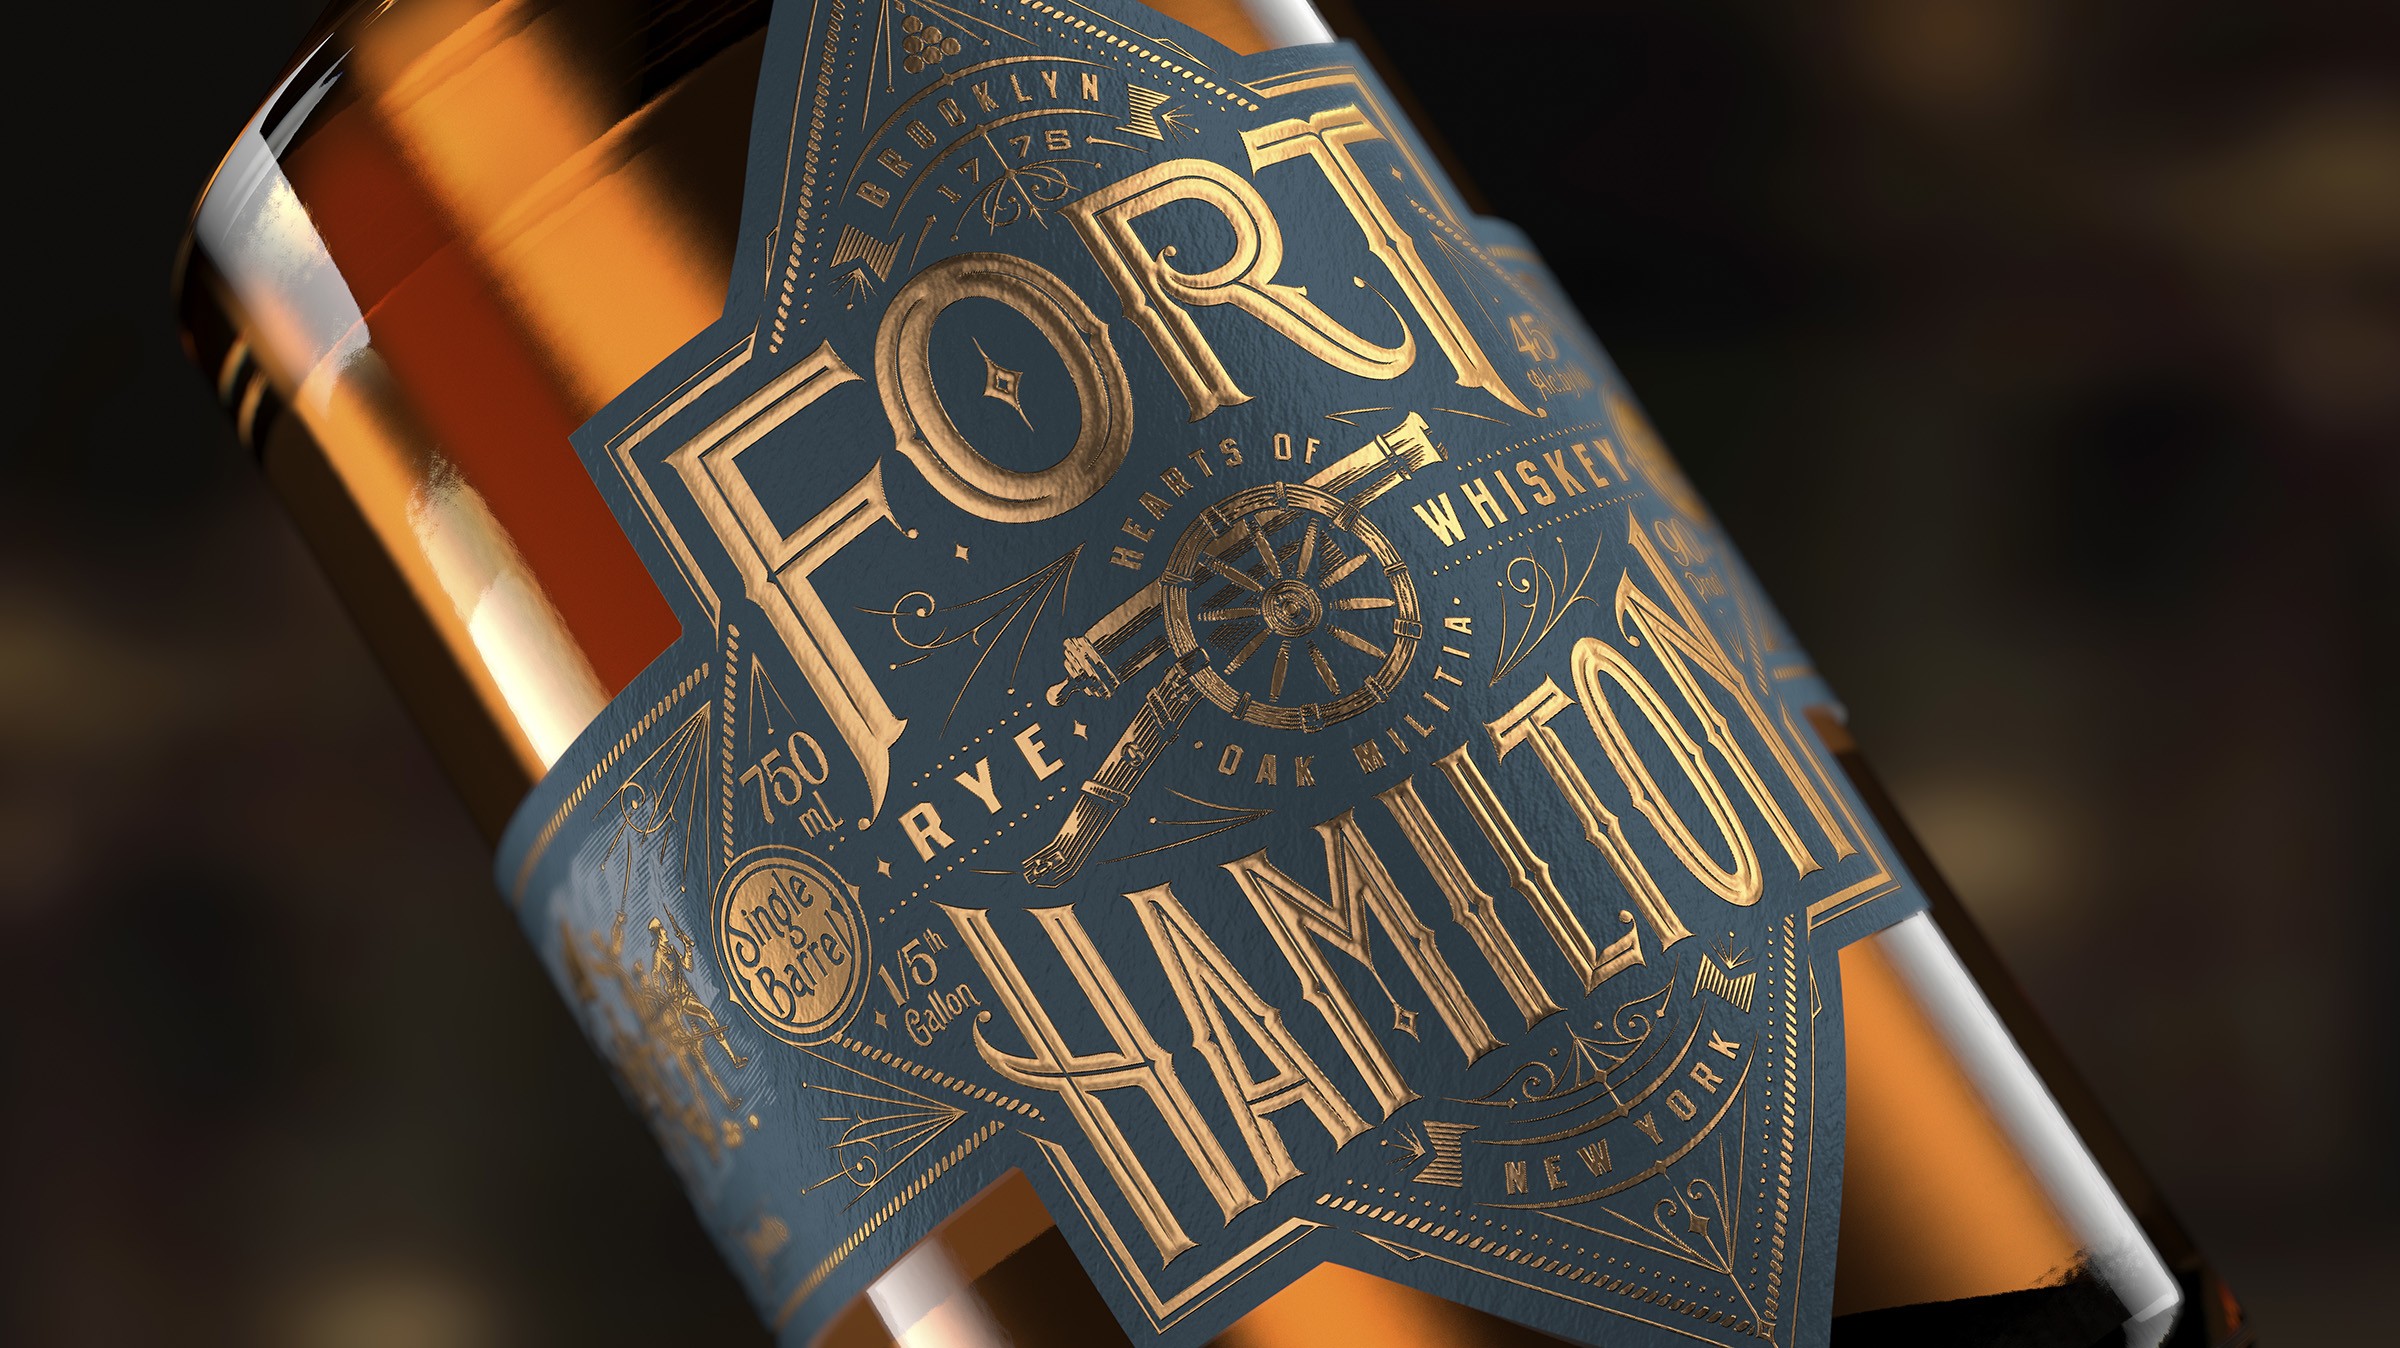 Bulletproof has Created the Brand Identity and Packaging Design for a New Premium Rye Whiskey for Fort Hamilton based in Brooklyn, New York